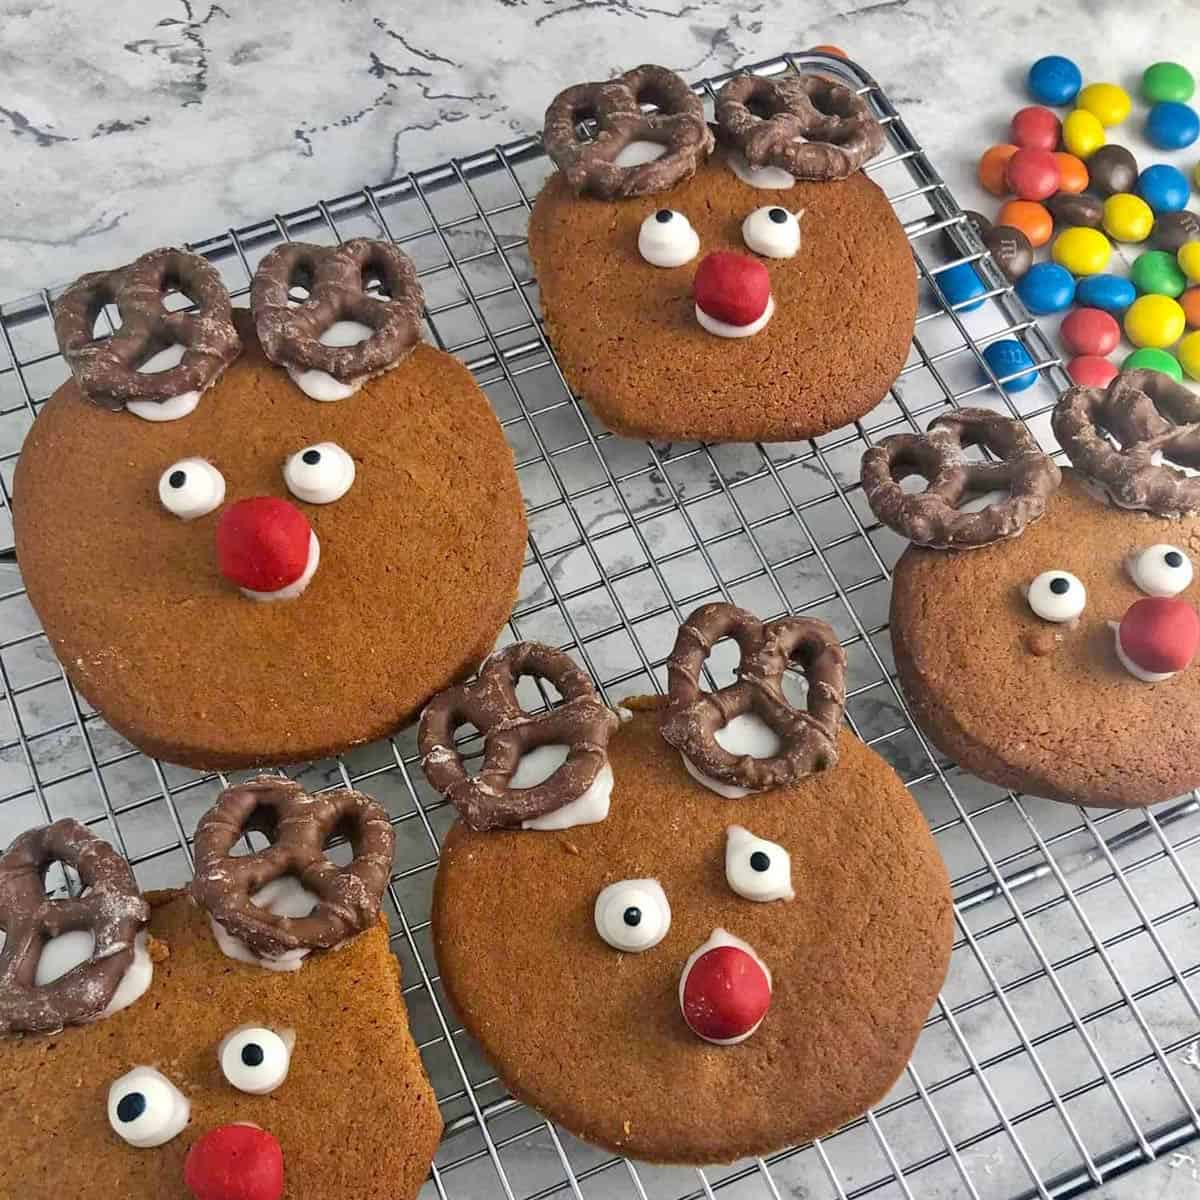 A group of reindeer ginger biscuits.